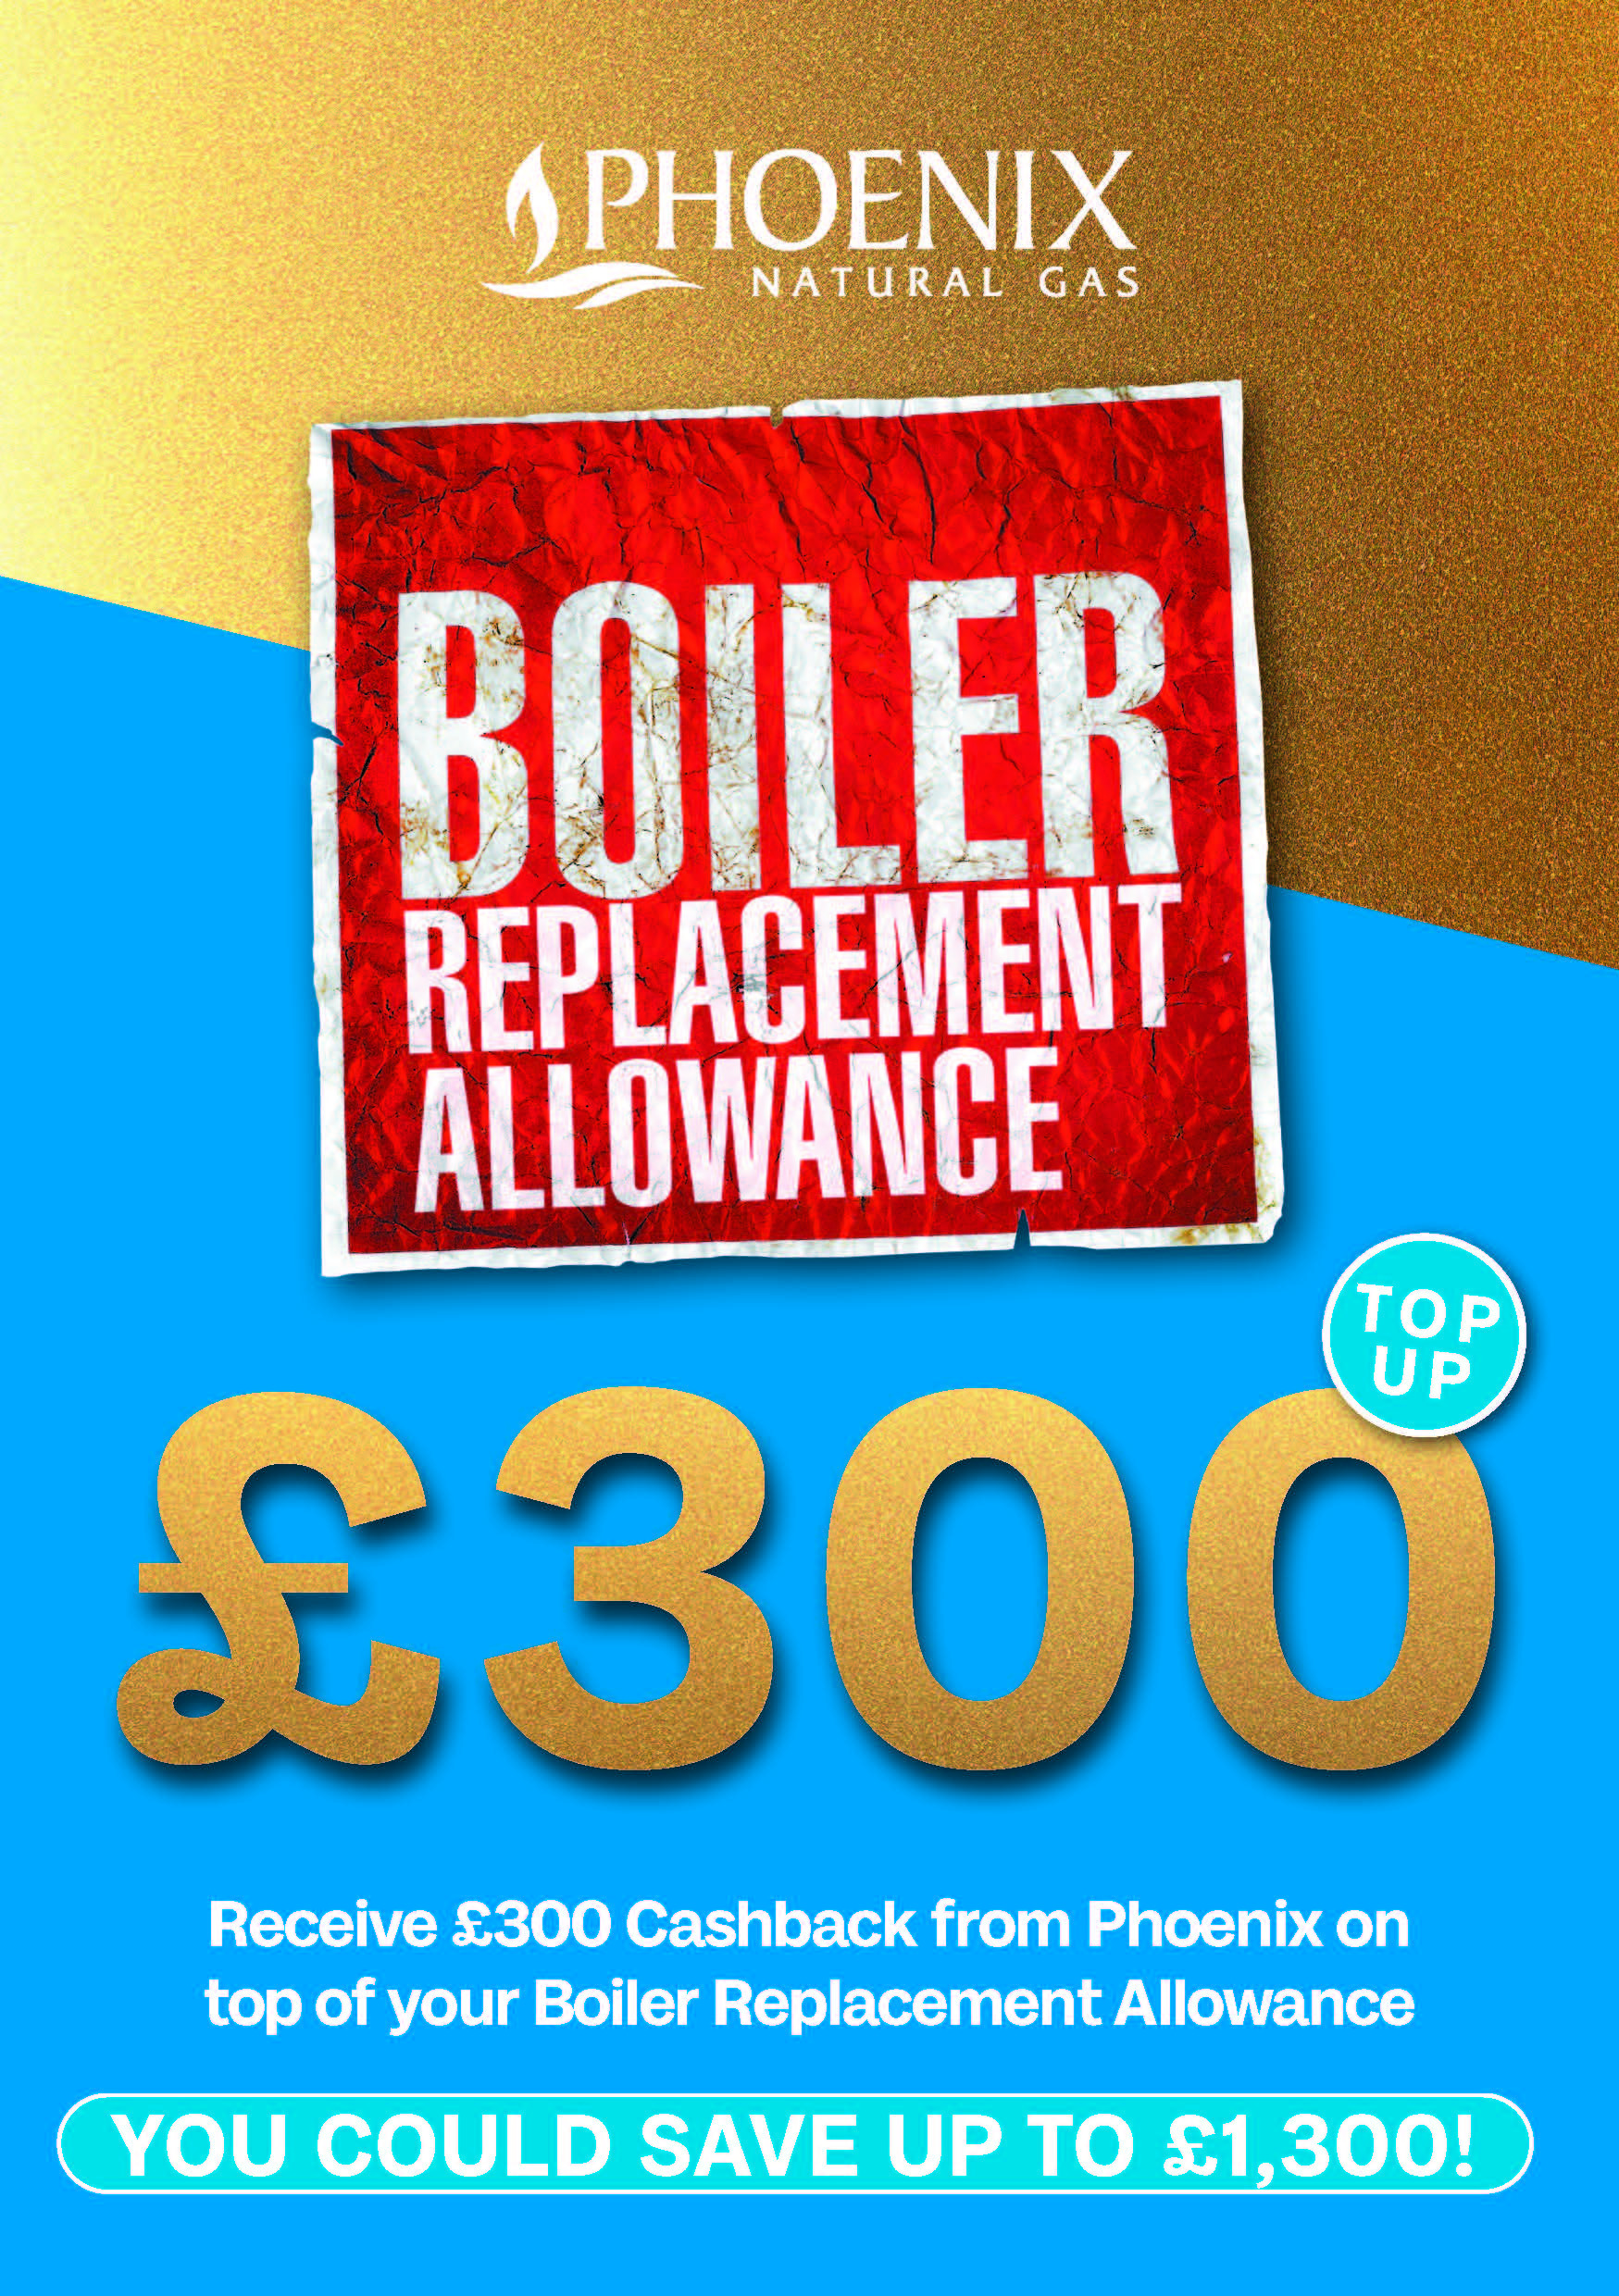 Boiler Replacement Allowance £300 Top Up, you could save up £1,300 - receive £300 cashback from Phoenix on top of your boiler replacement allowance.